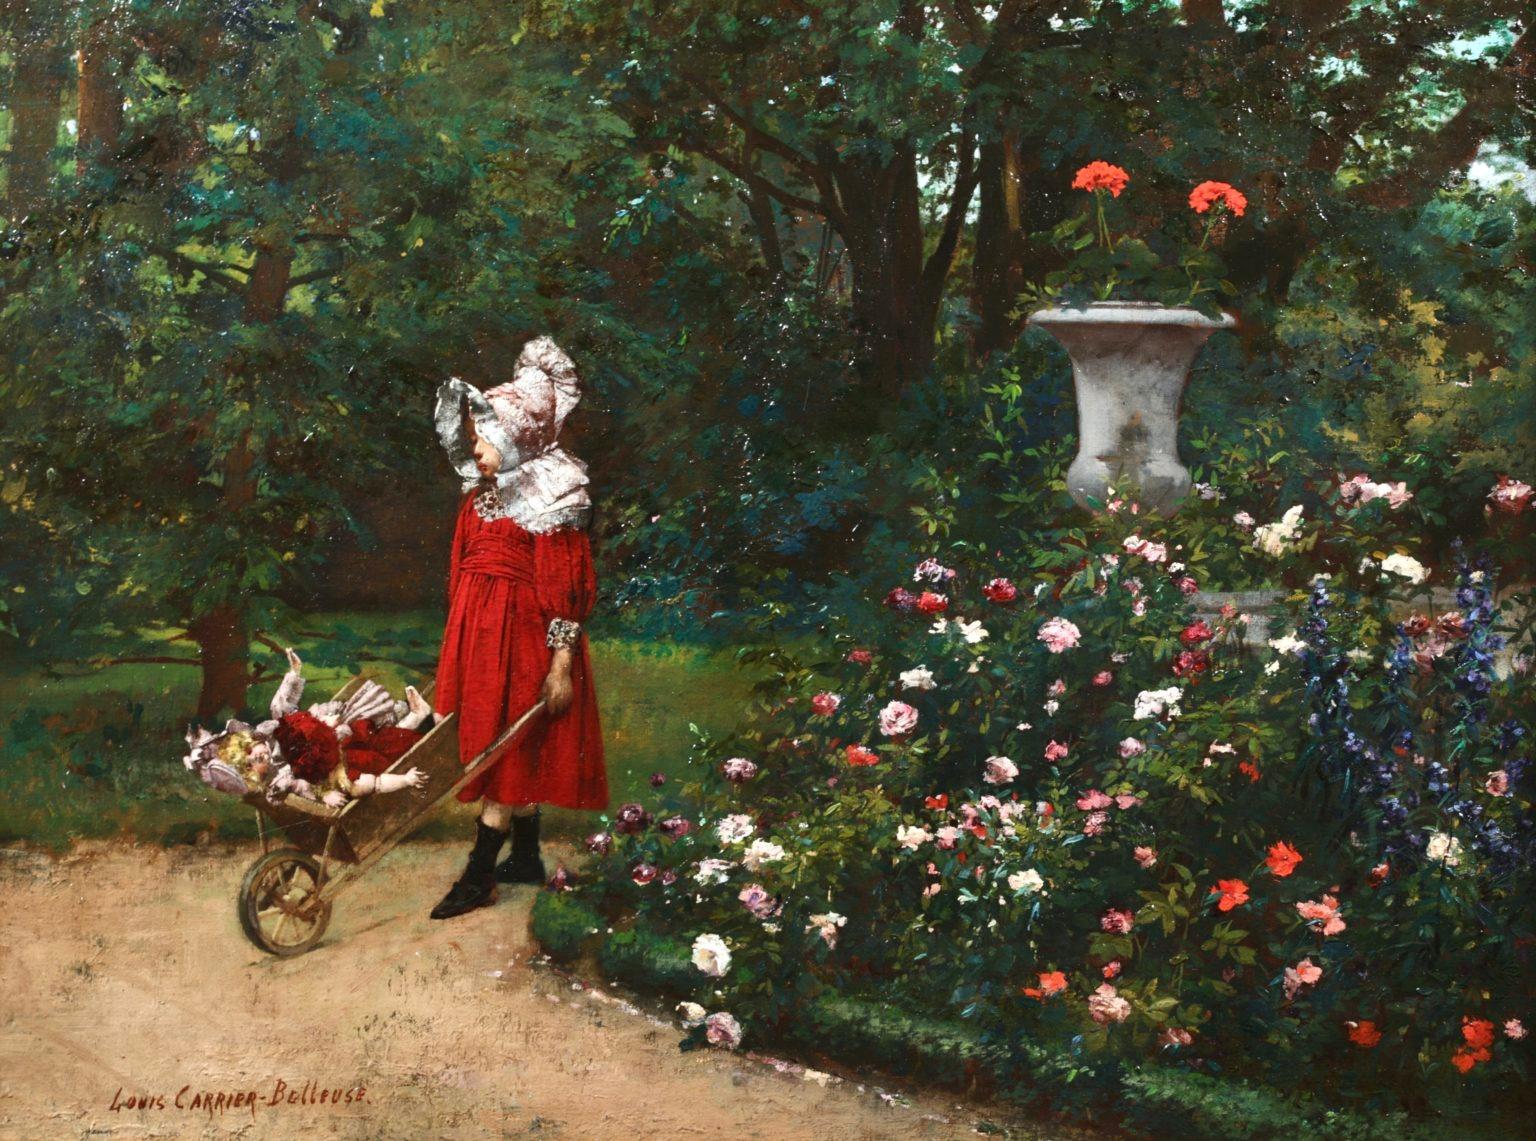 Signed impressionist oil on canvas circa 1890 by French painter and sculptor. The work depicts a young girl in a red dress and white bonnet pushing her doll in a wheelbarrow along a garden path. There is lush green grass to her right and a beautiful